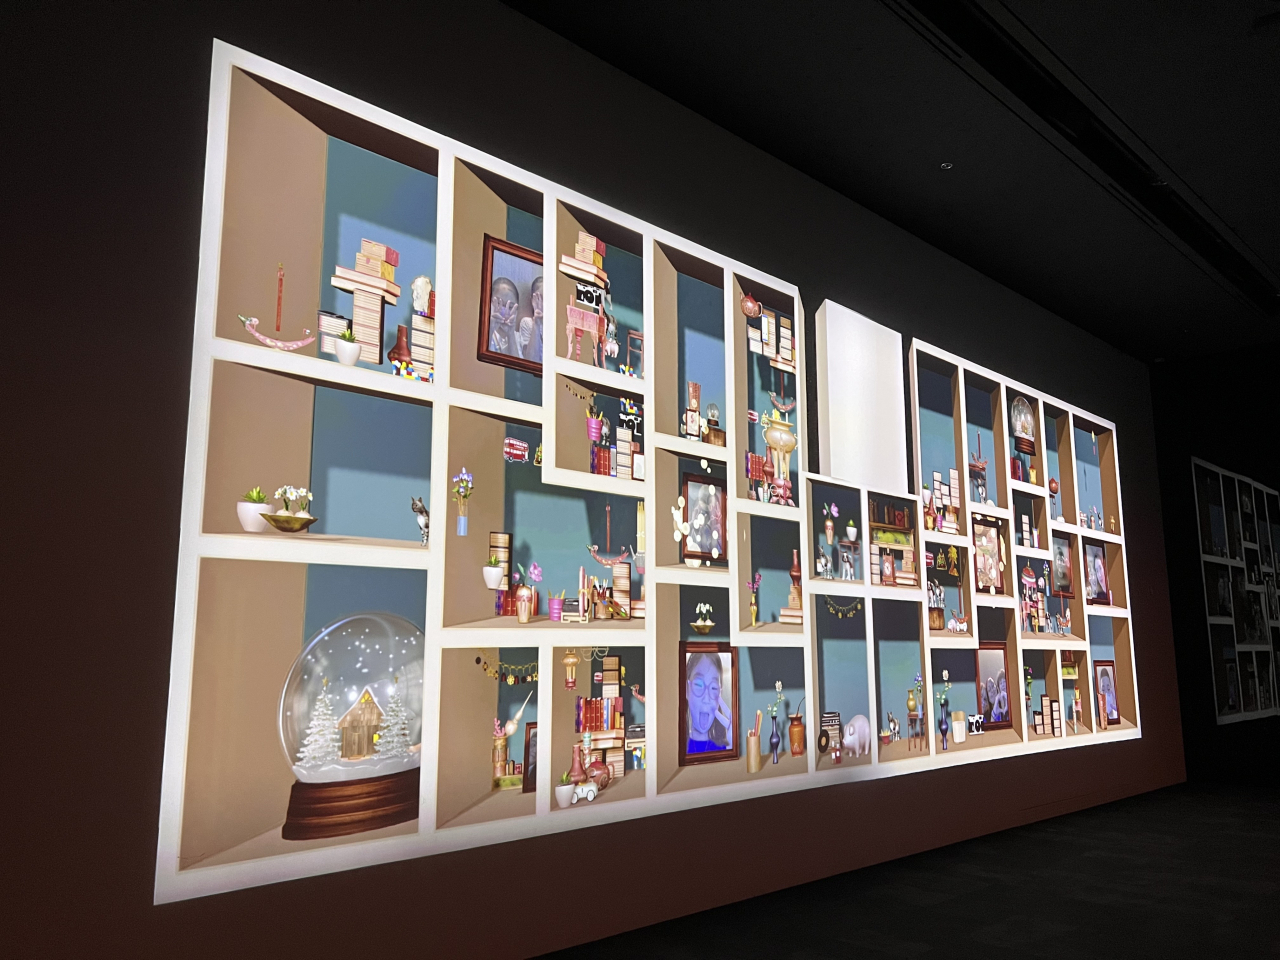 A digital wall with beloved artifacts that museum visitors have chosen are showcased at the NMK's Immersive Digital Gallery. (Kim Hae-yeon/ The Korea Herald)